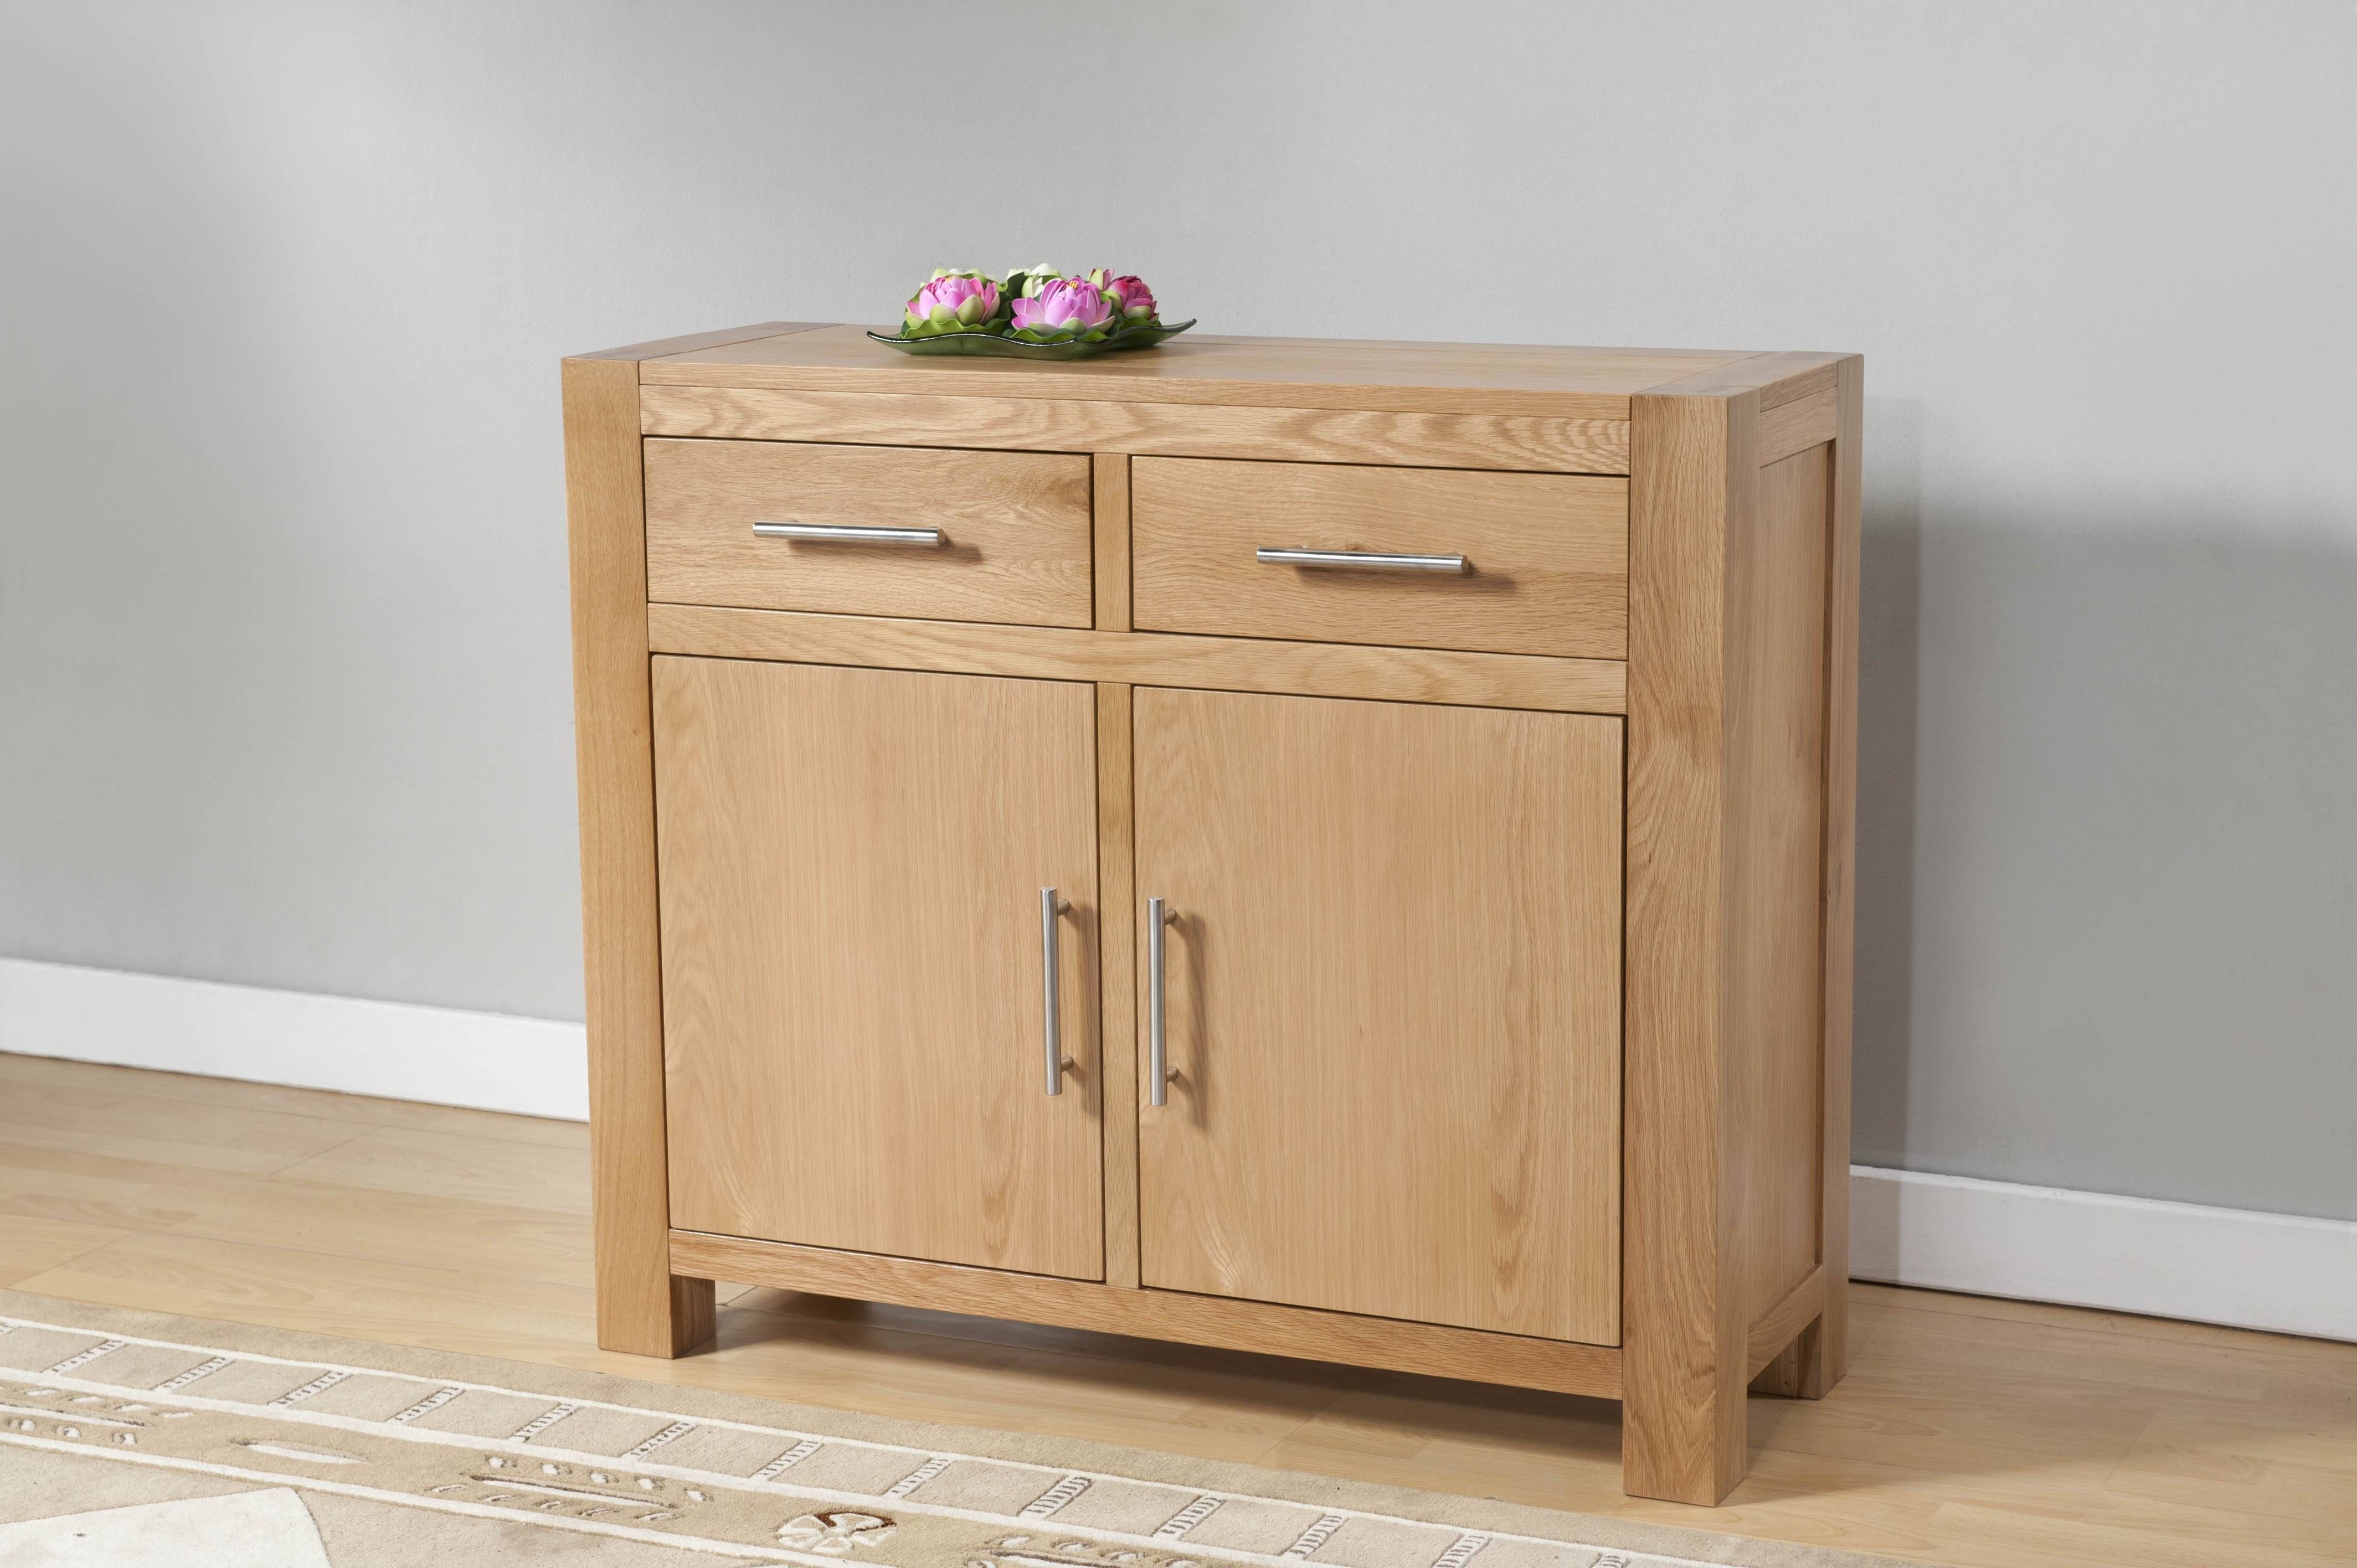 Milano Oak 2 Door 2 Drawer Small Sideboard | Oak Furniture Solutions For Small Sideboards With Drawers (View 12 of 30)